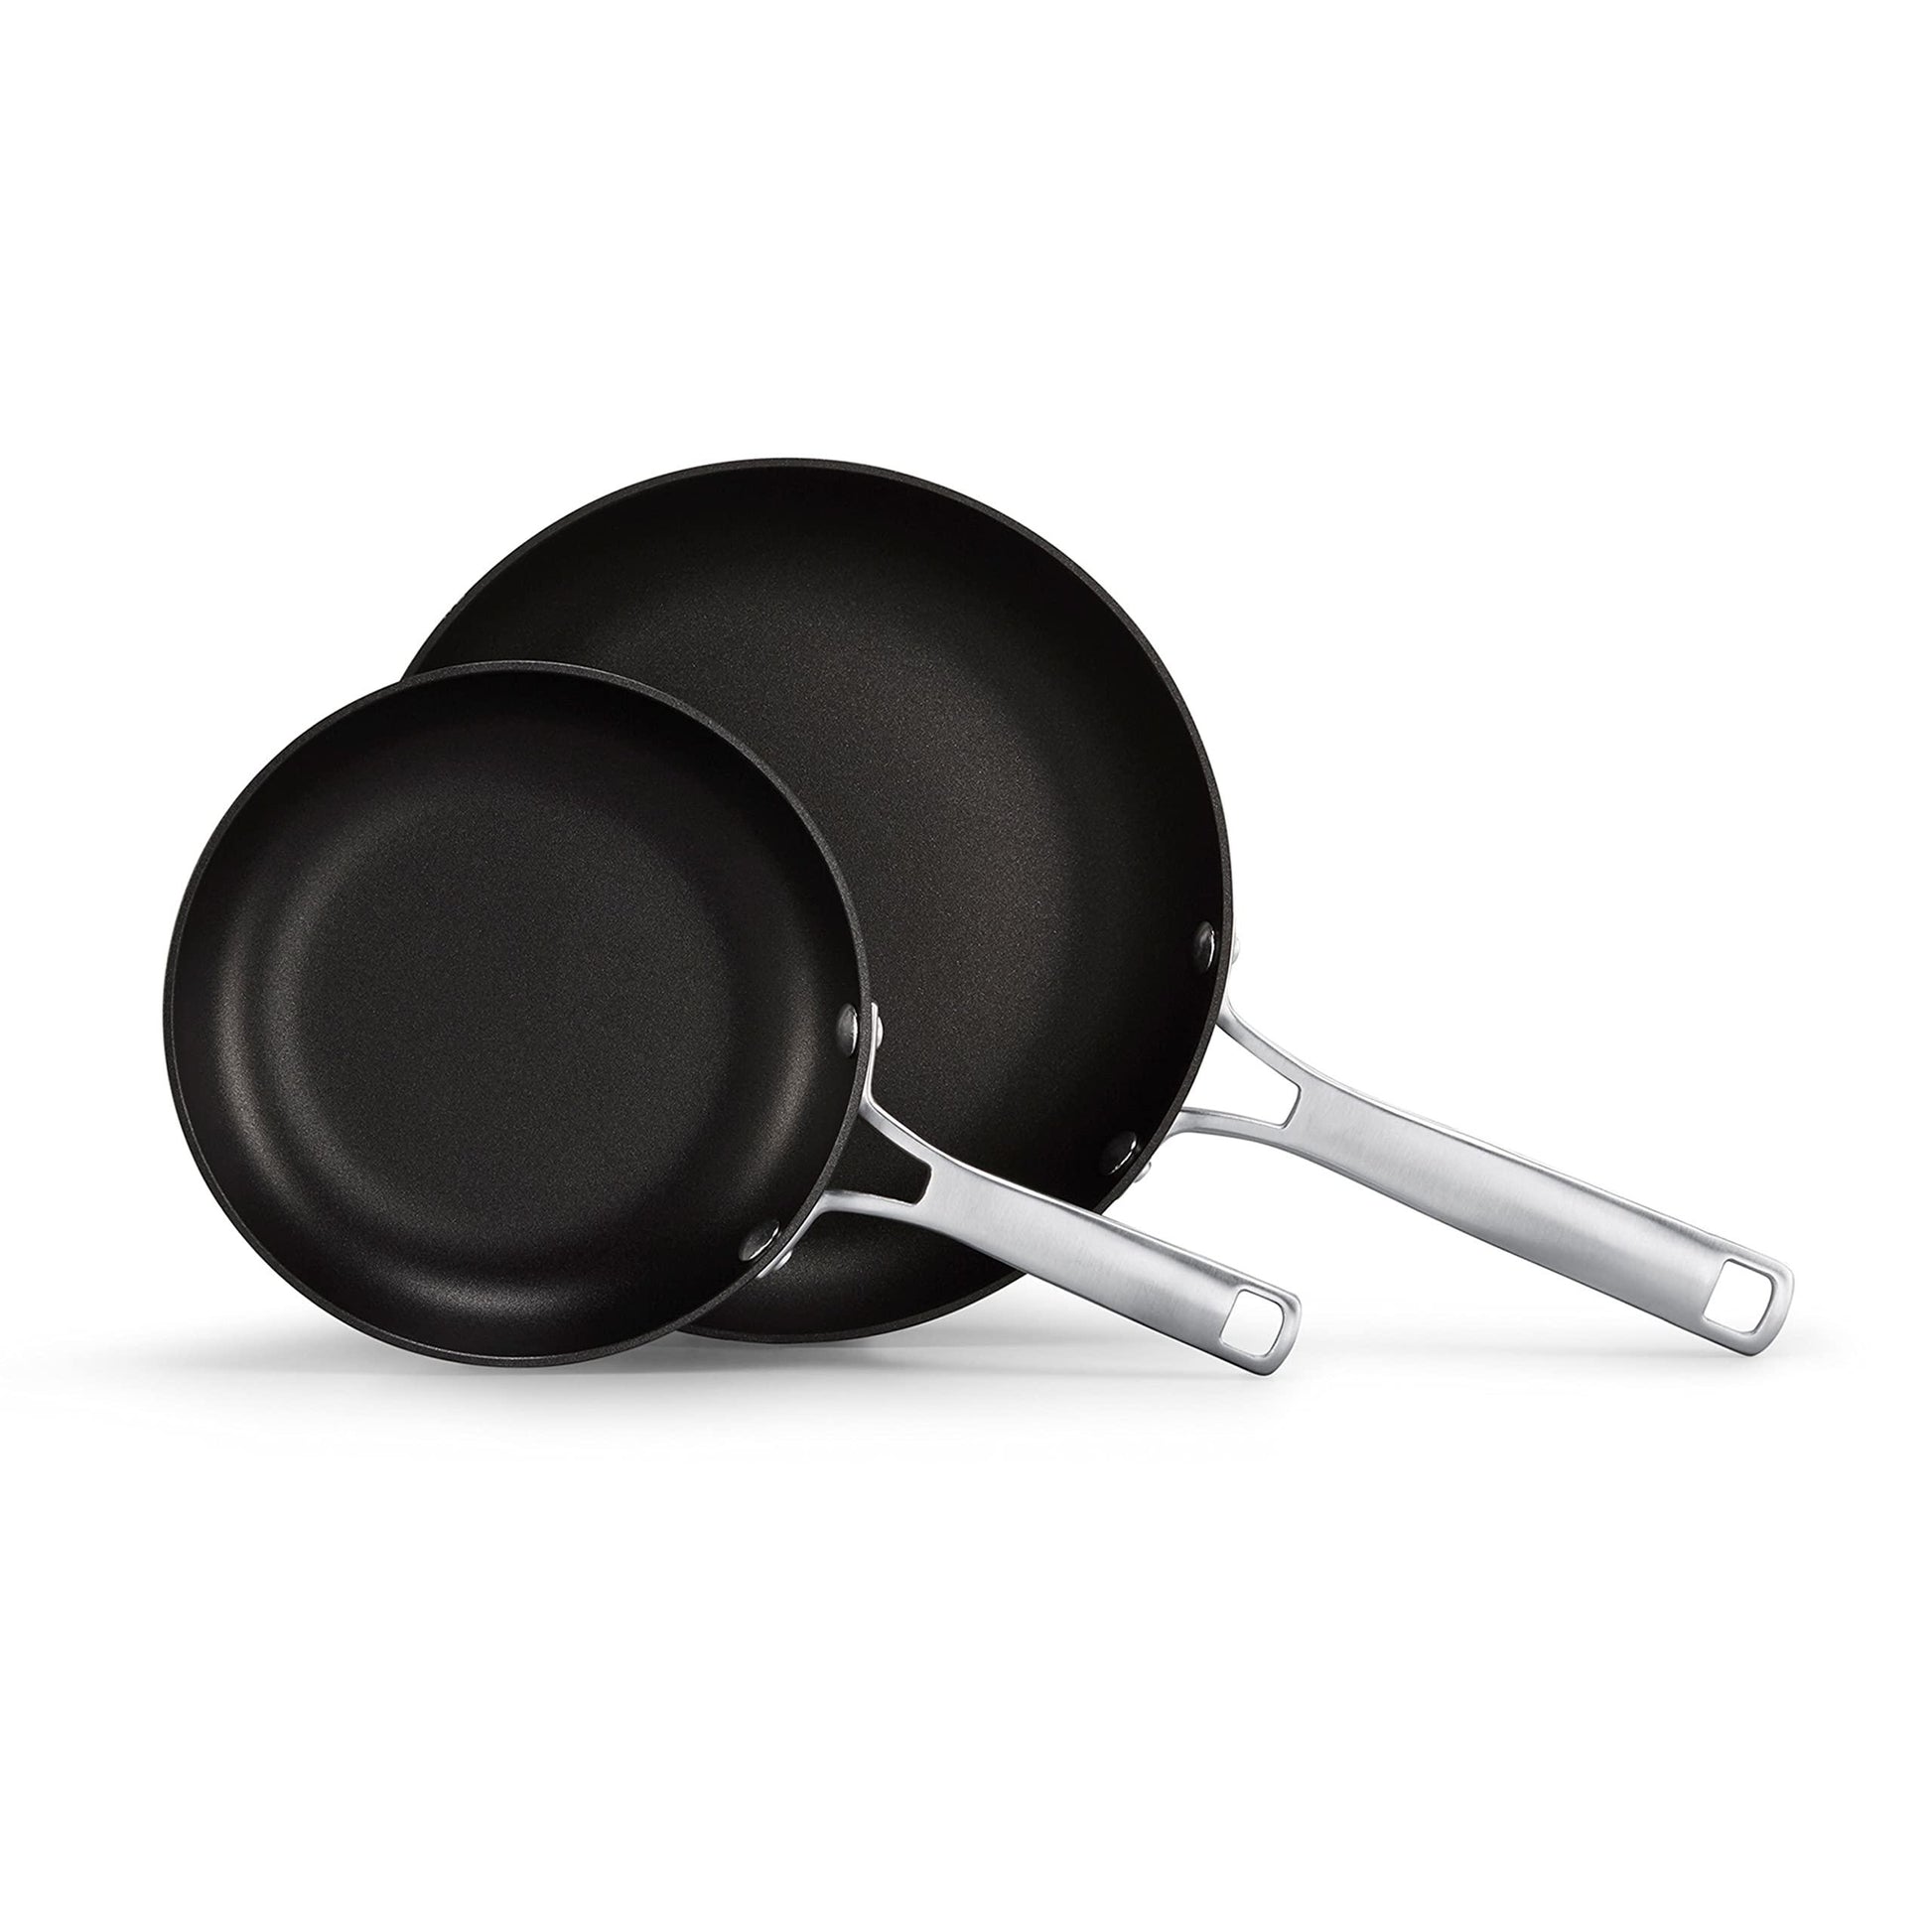 Calphalon Classic Hard-Anodized Nonstick Frying Pan Set, 8-Inch and 10-Inch Frying Pans - CookCave